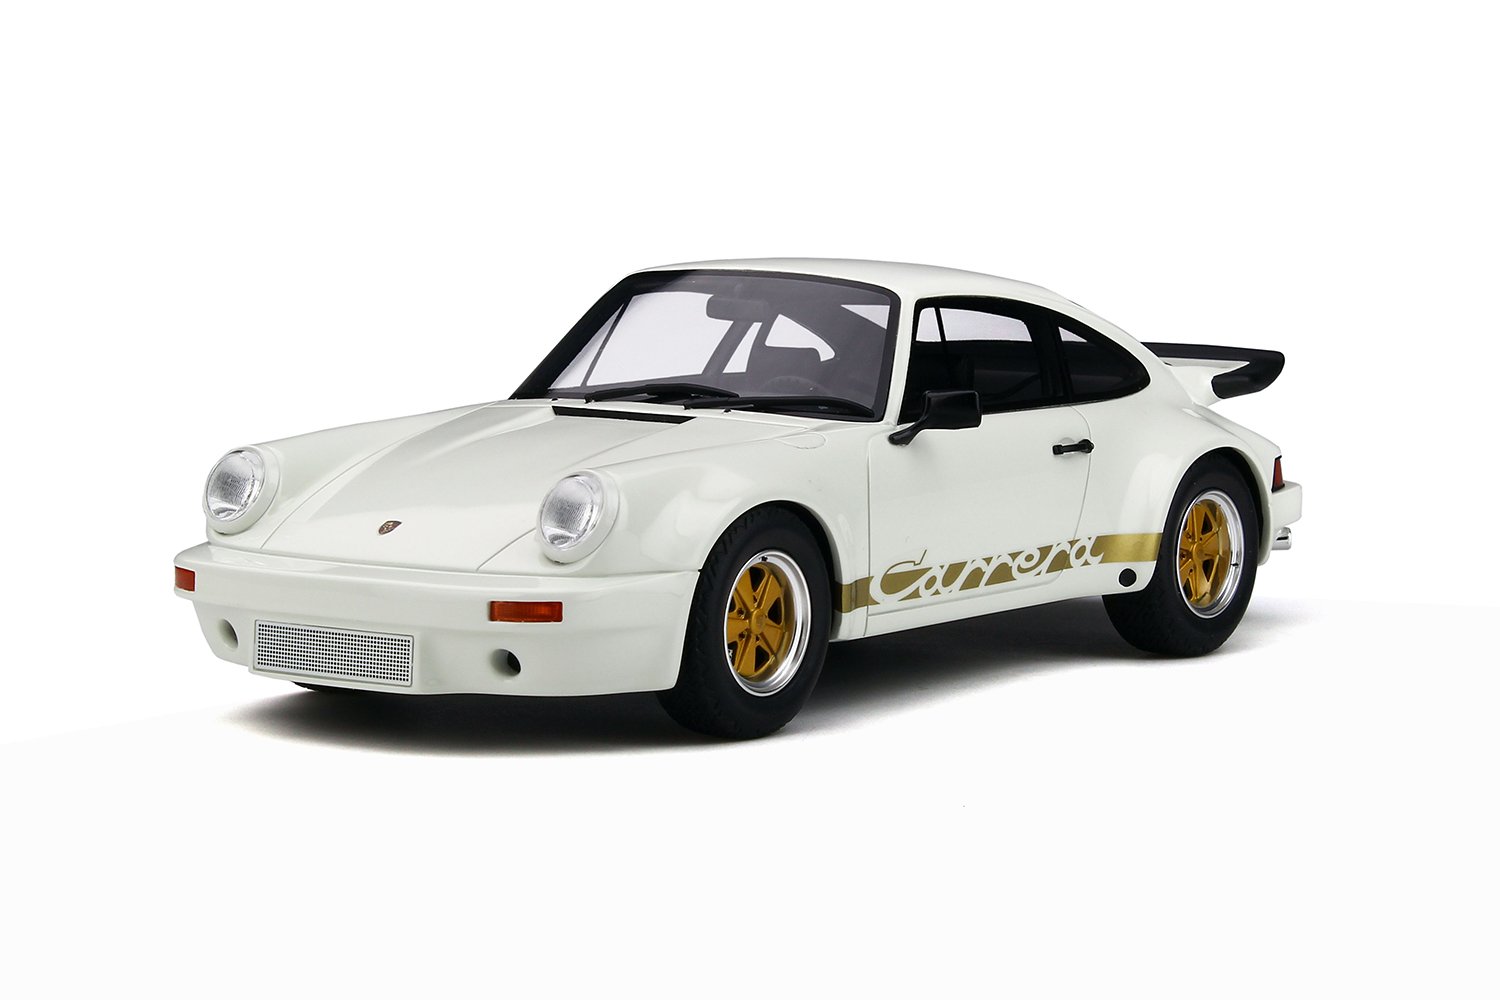 Porsche 911 Carrera 3.0 Rs Grand Prix White Limited Edition To 999 Pieces Worldwide 1/18 Model Car By Gt Spirit